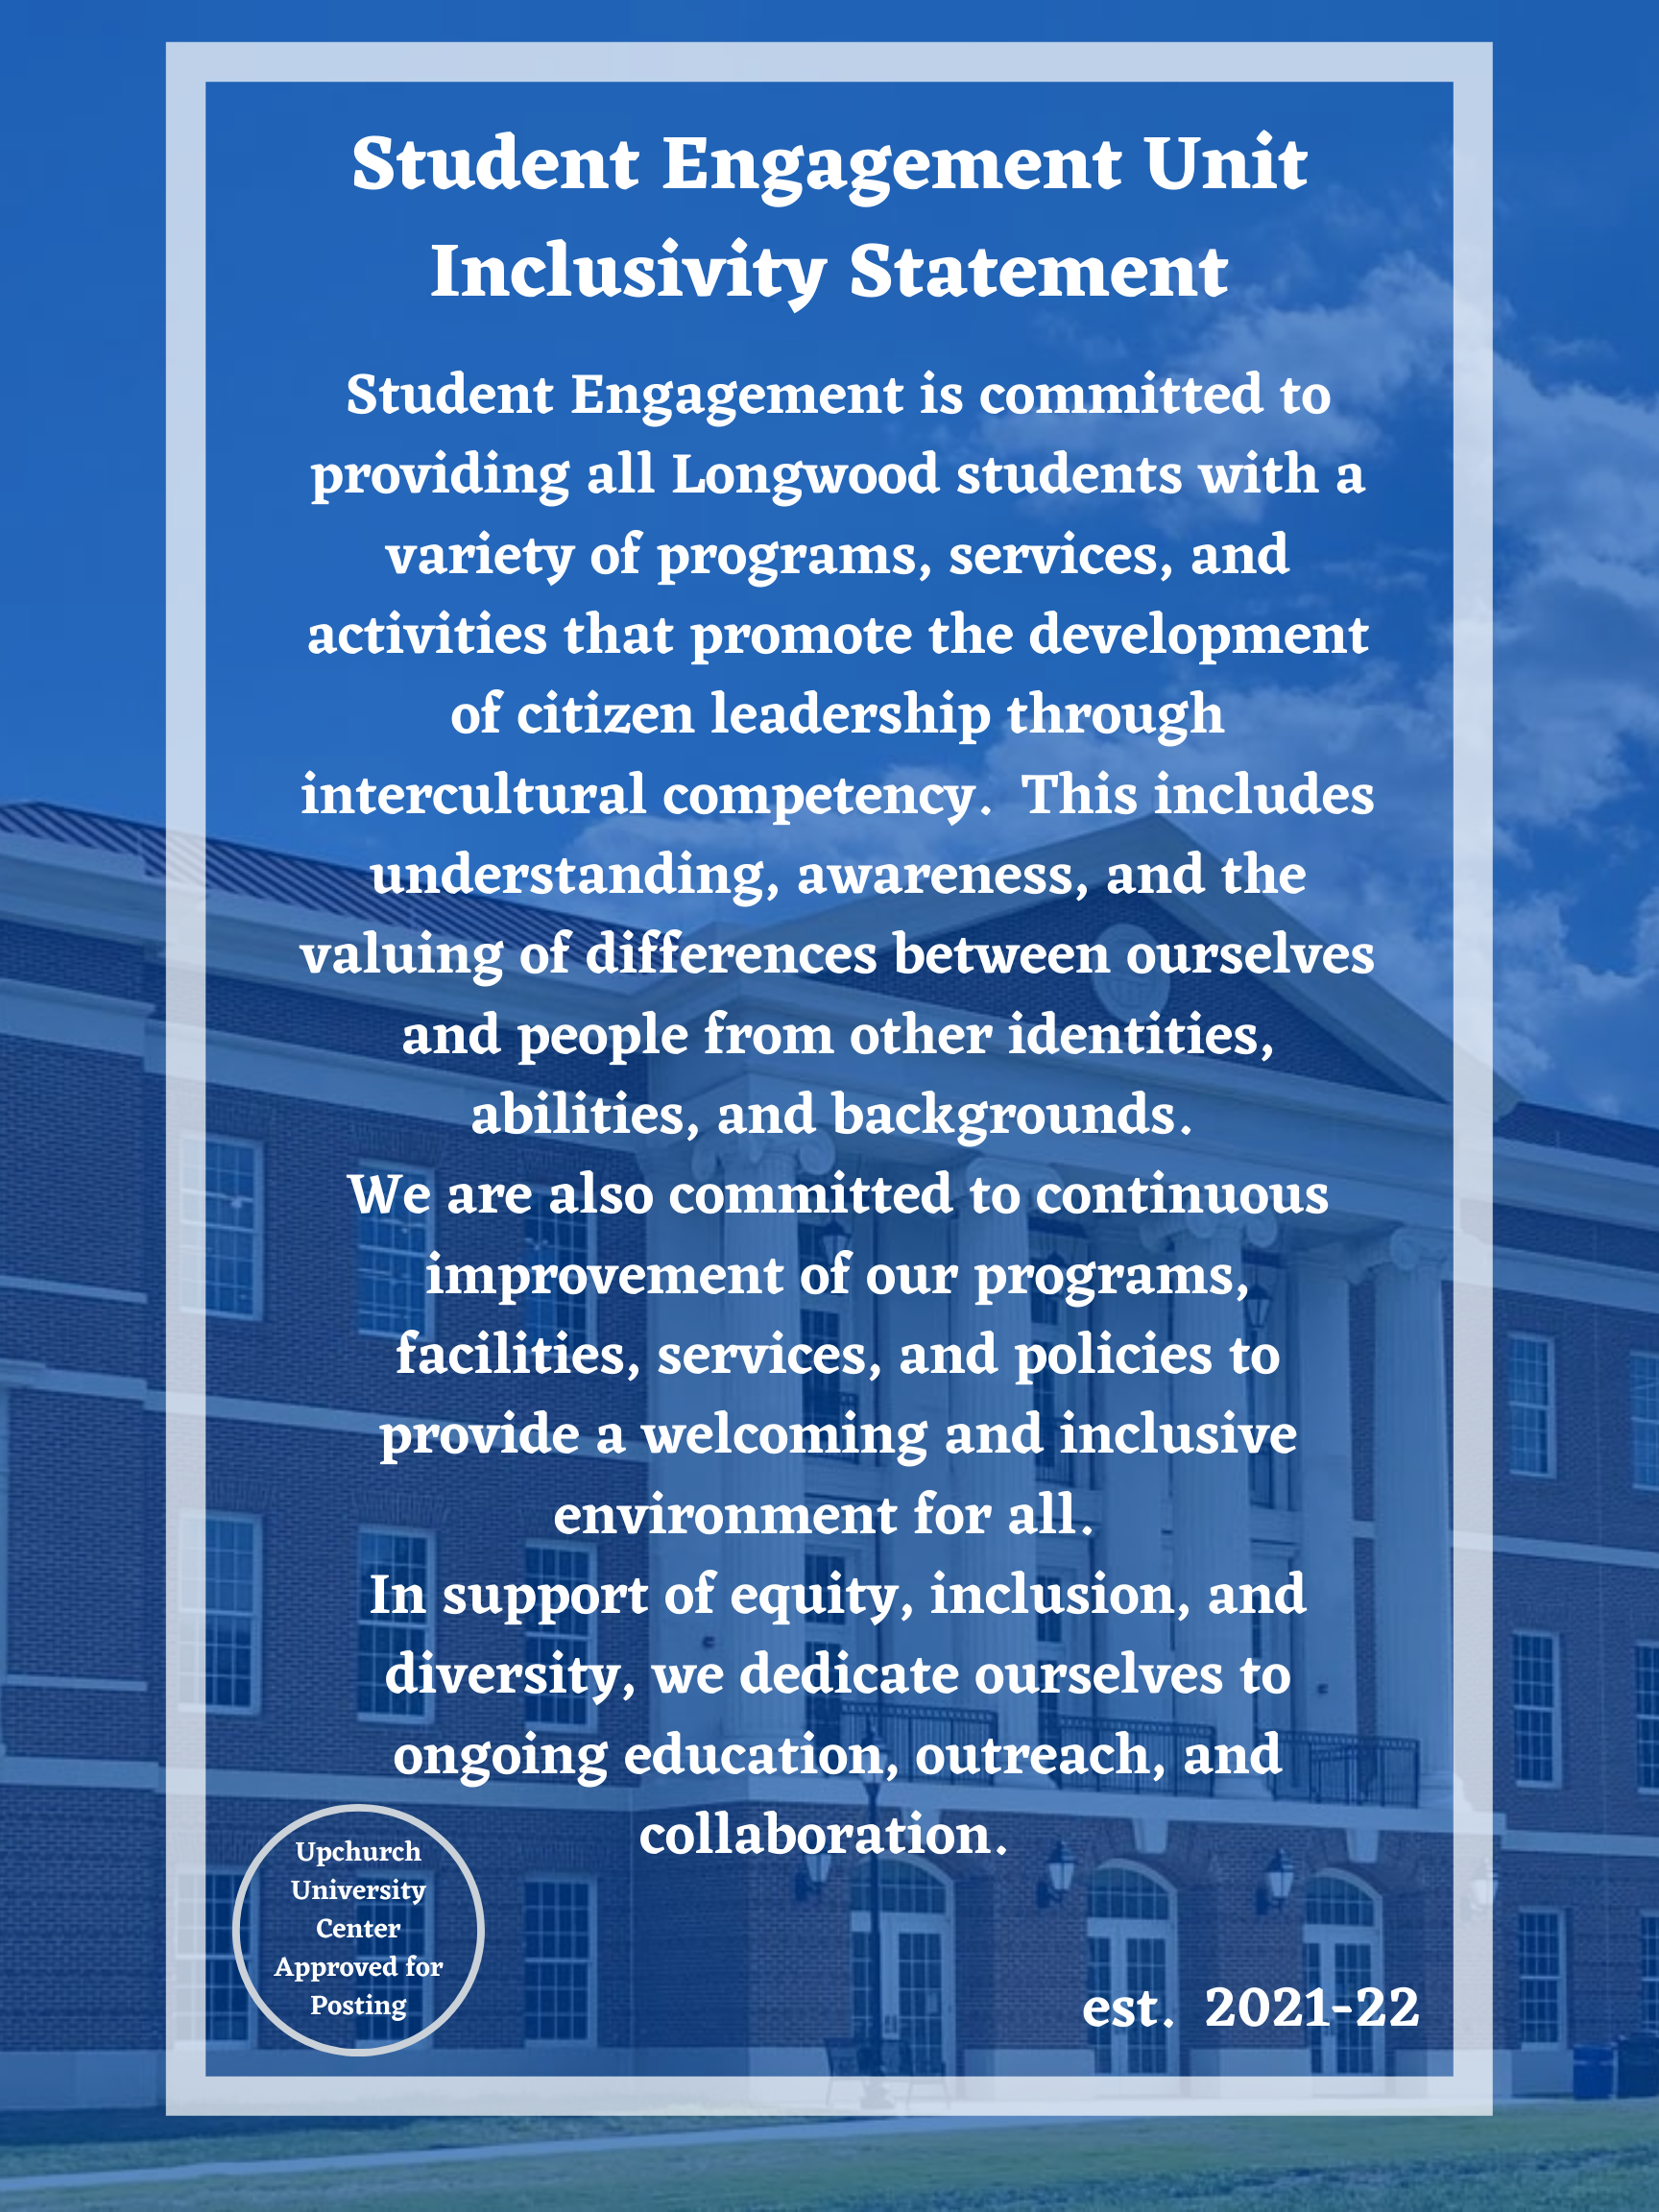 Student Engagement Inclusivity Statement 2021-22.png